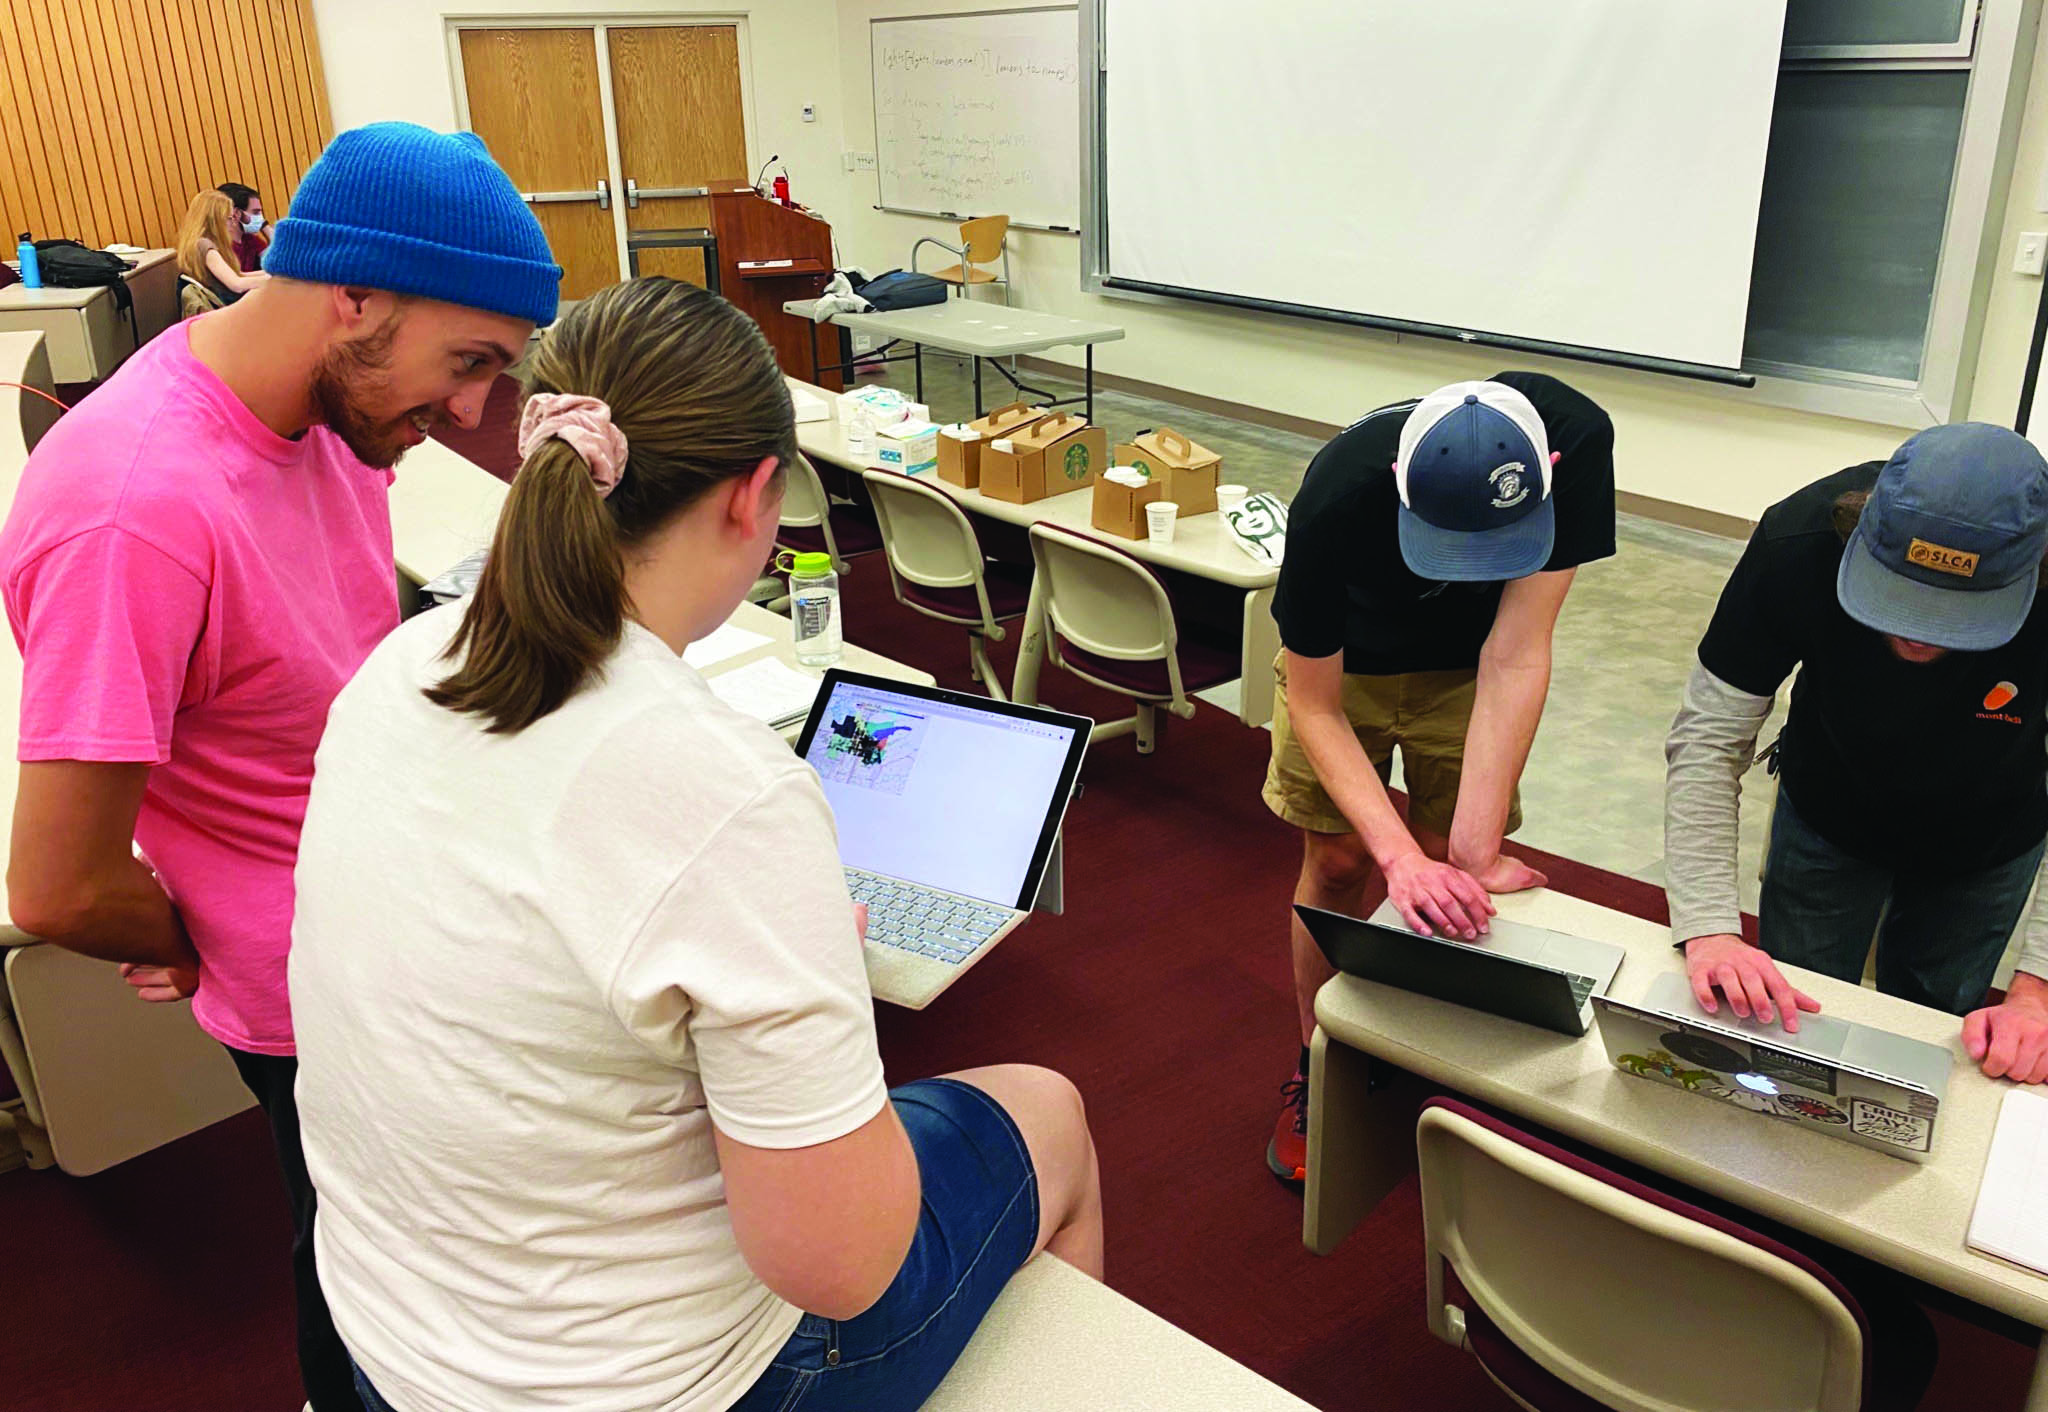 Undergraduate students explore light pollution data during the University of Utah’s Datathon4Justice in March 2022. Photo courtesy of Rebecca Hardenbrook.